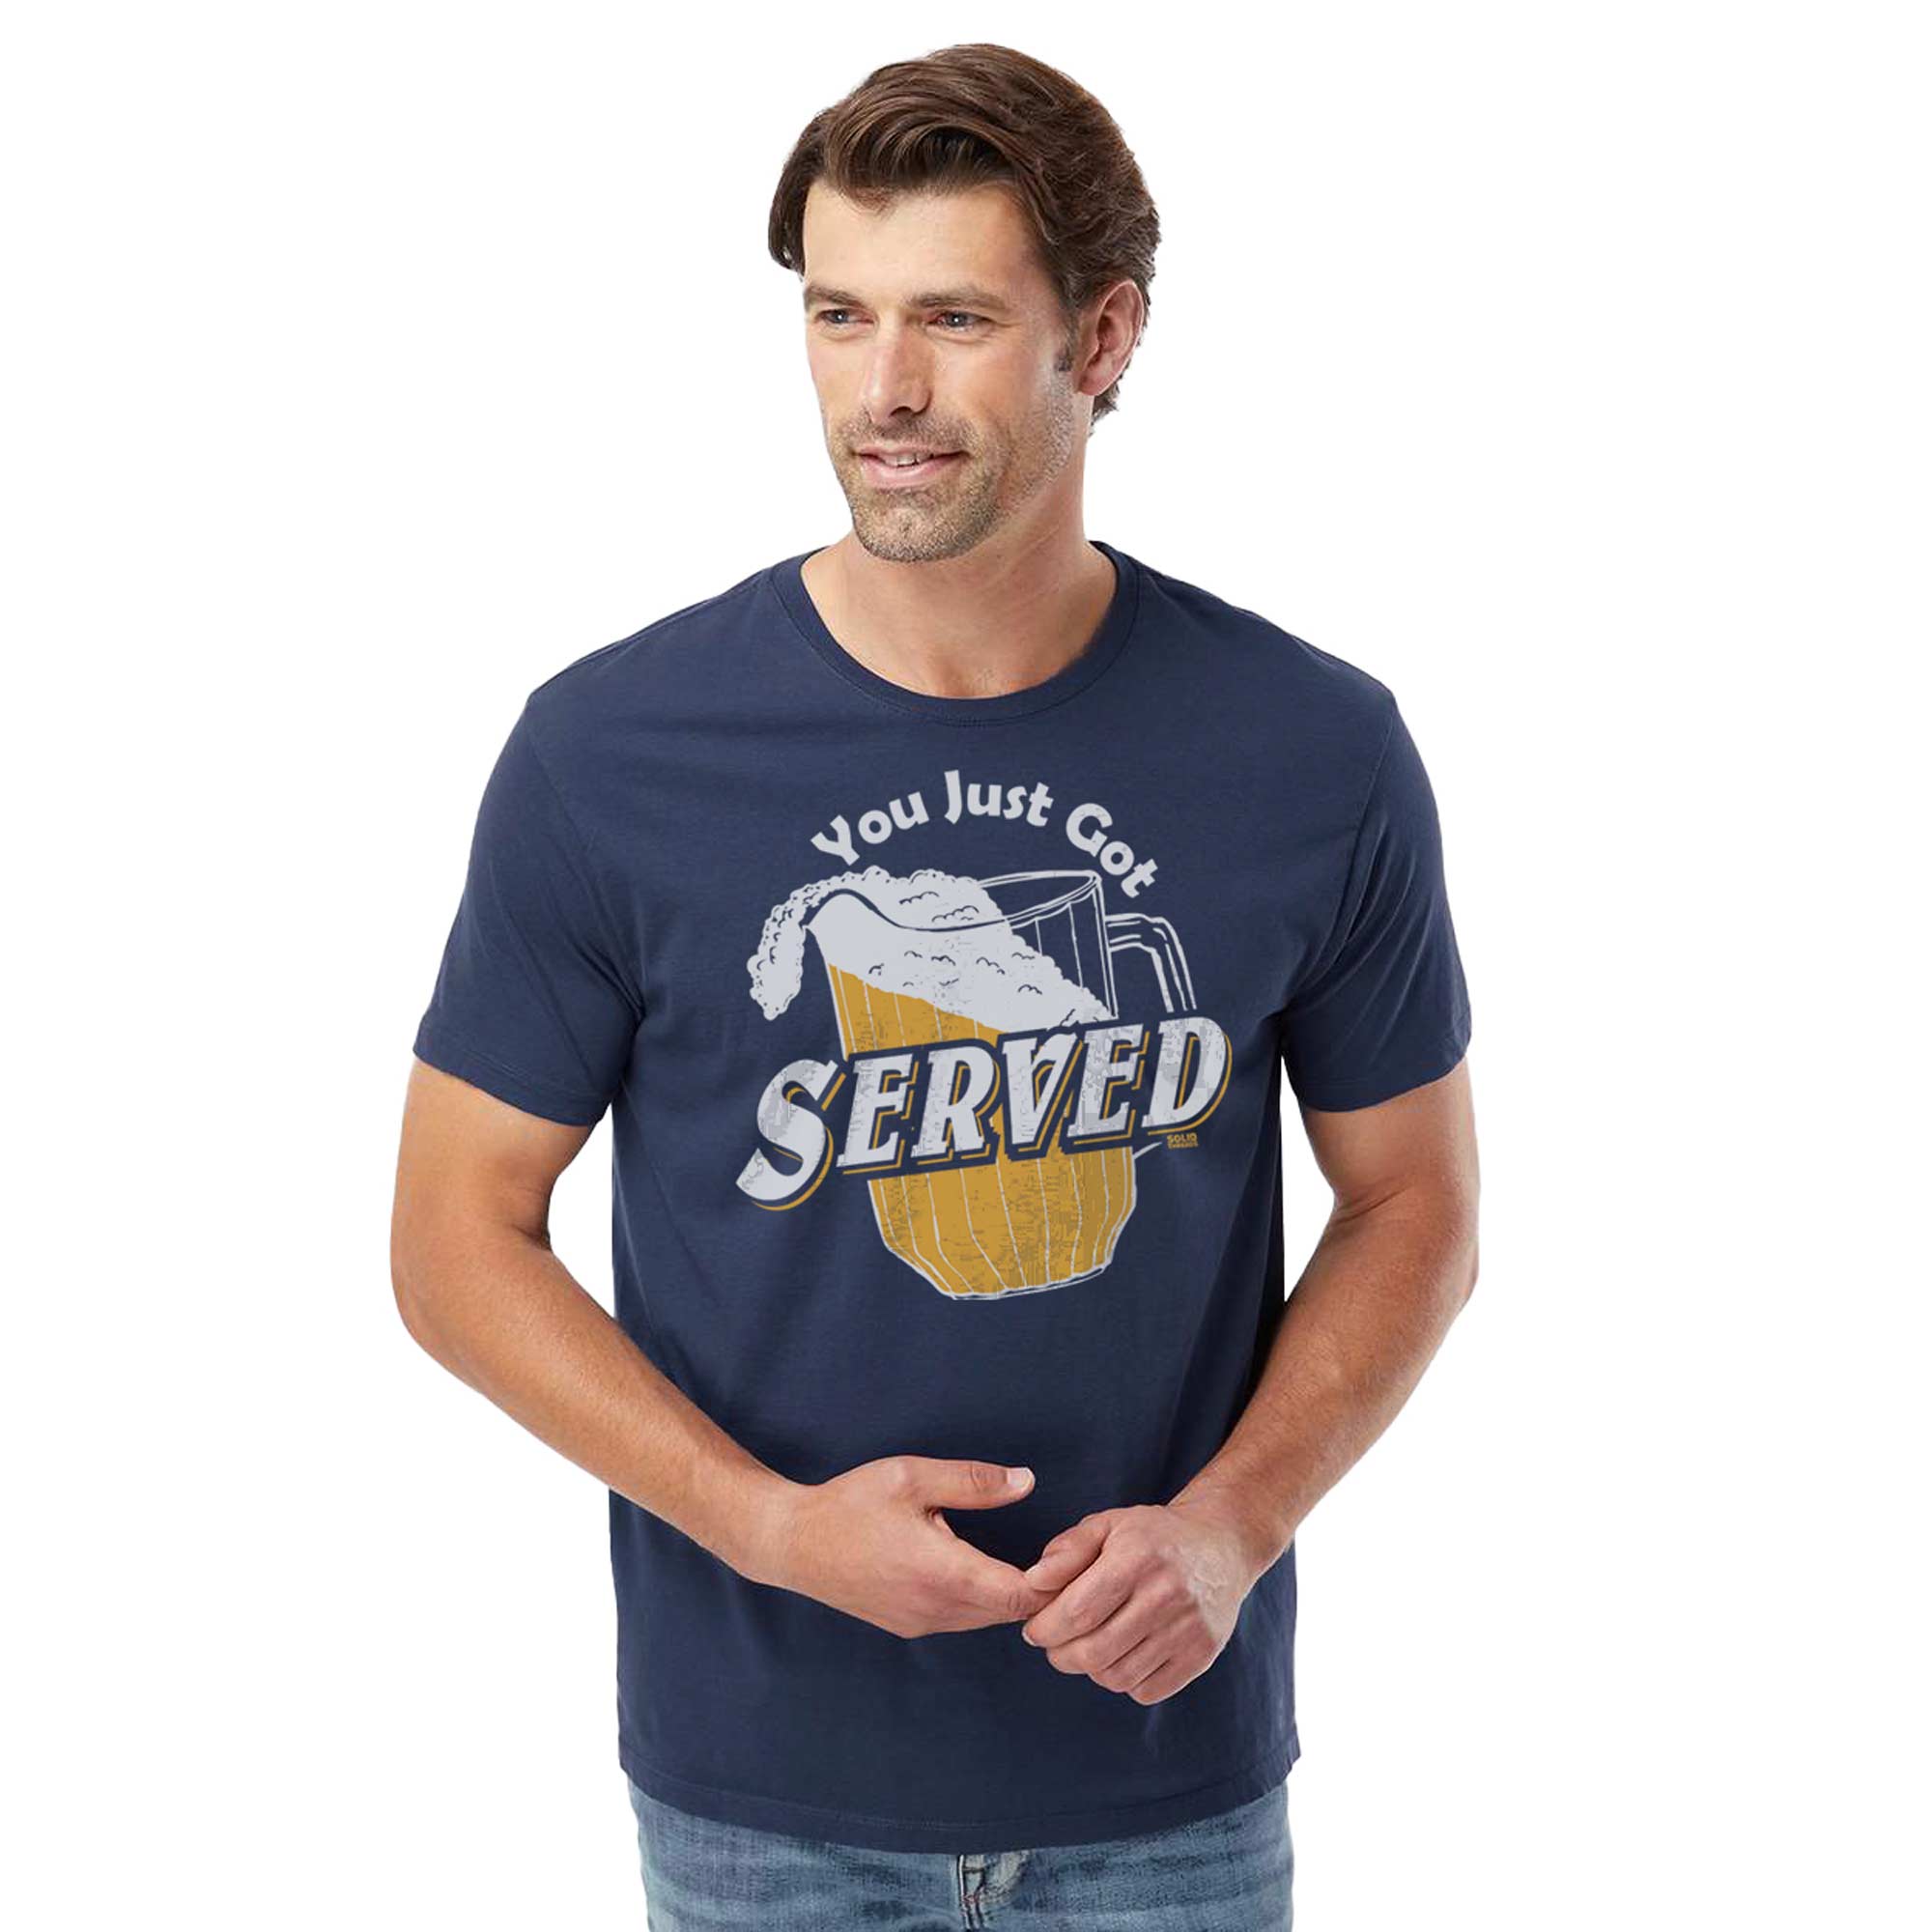 You Just Got Served Funny Organic Cotton T-shirt | Vintage Beer Drinking Tee | Solid Threads